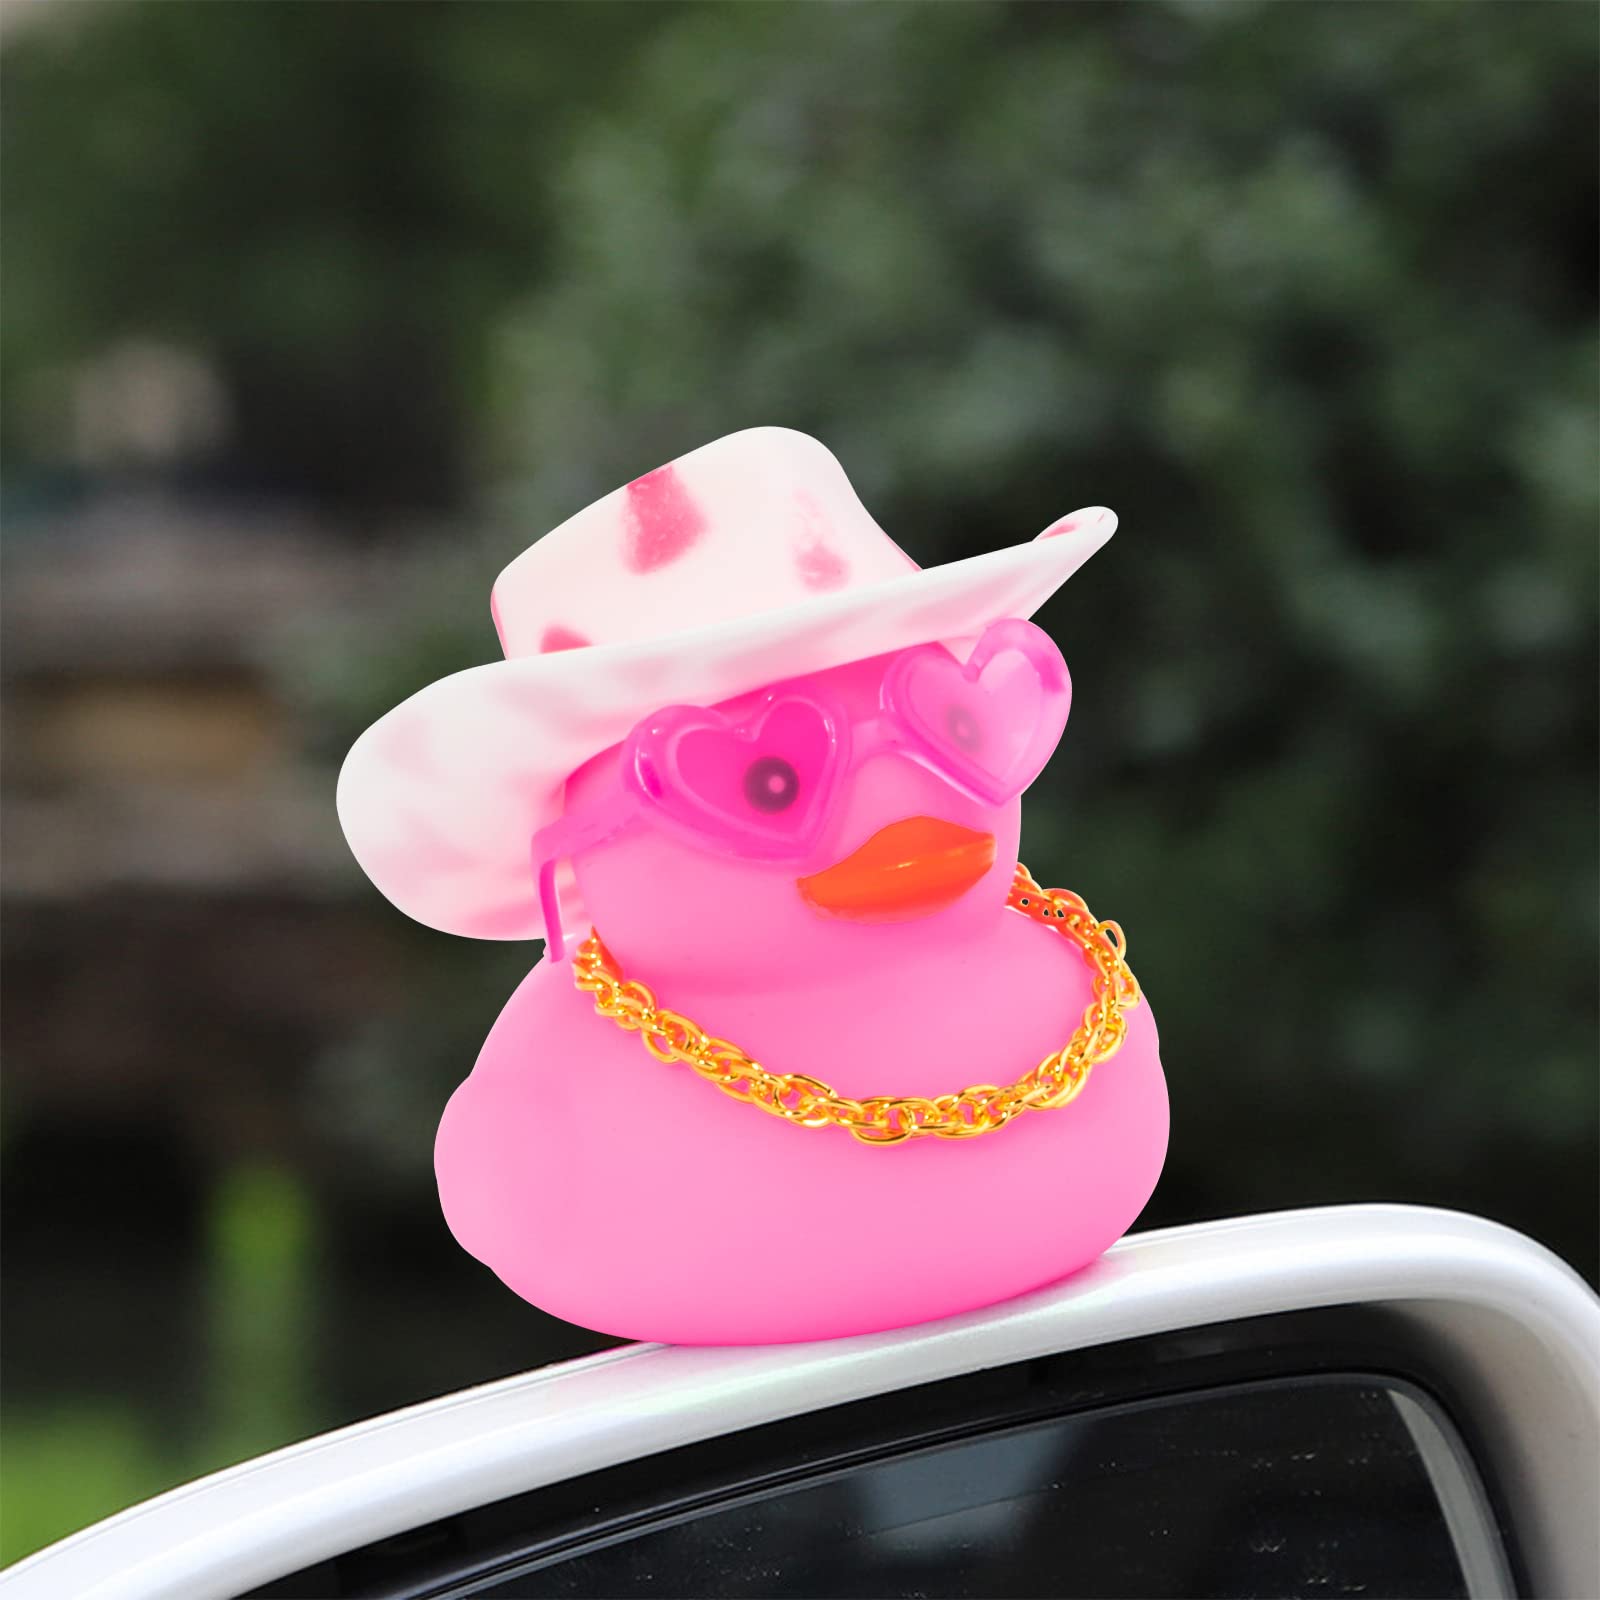 wonuu 2Pcs Rubber Duck, Cute Pink Love Heart Cowboy Hat Duck Dashboard Decoration and Queen Crown Pearl Necklace Duck Car Accessories, Surprising Birthday Gift Unique Table Decor Tiktok Duck